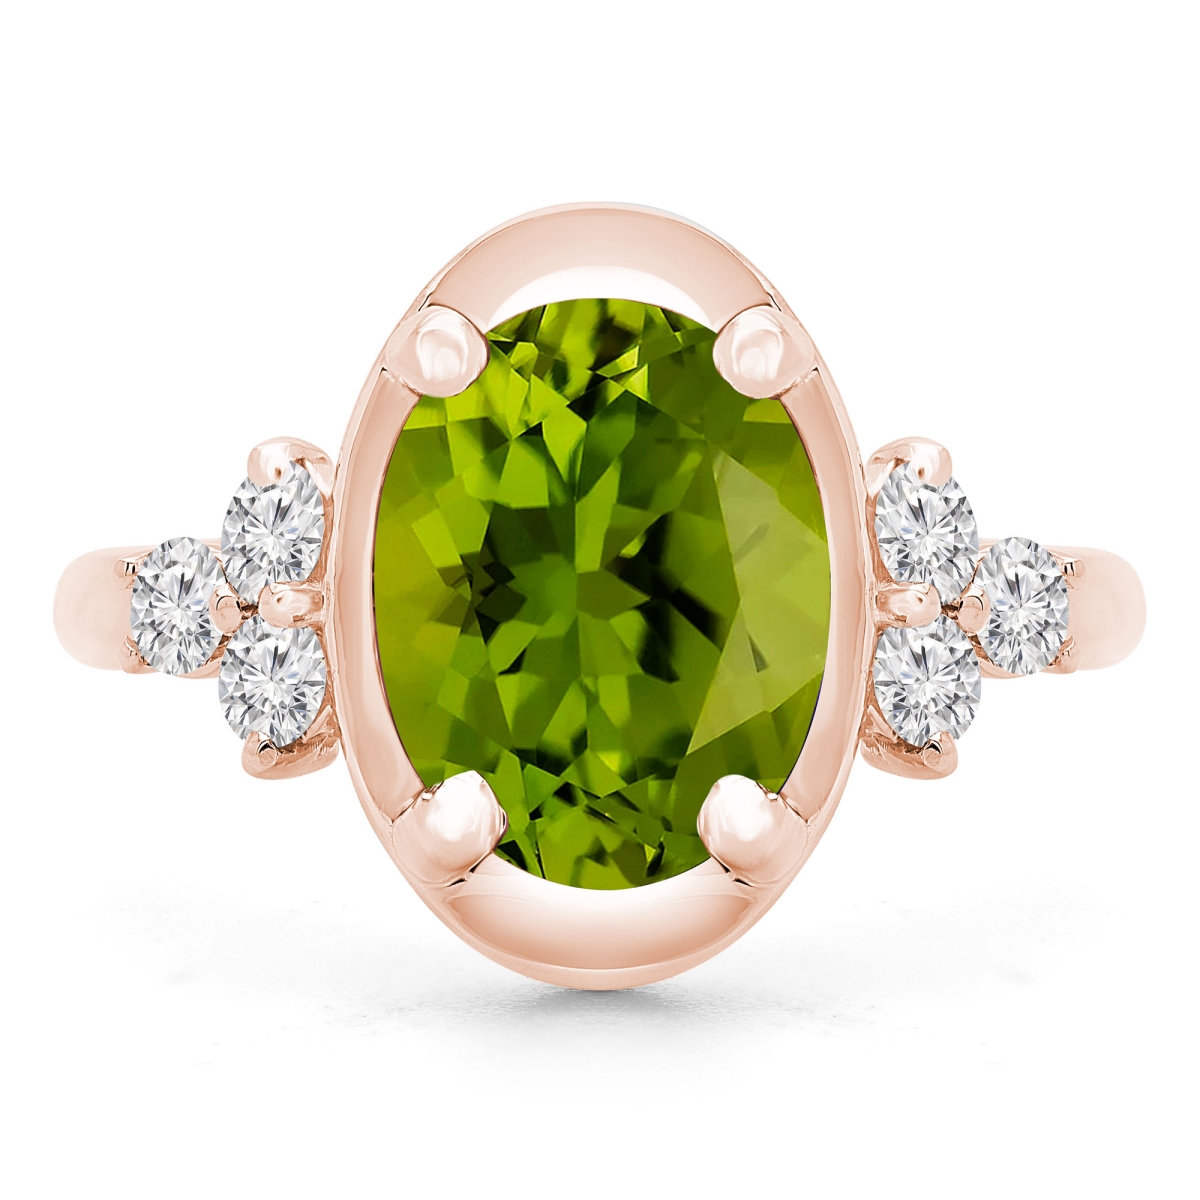 Picture of Majesty Diamonds MD190412-8.25 3.9 CTW Oval Green Peridot Cocktail Ring in 14K Rose Gold - Size 8.25